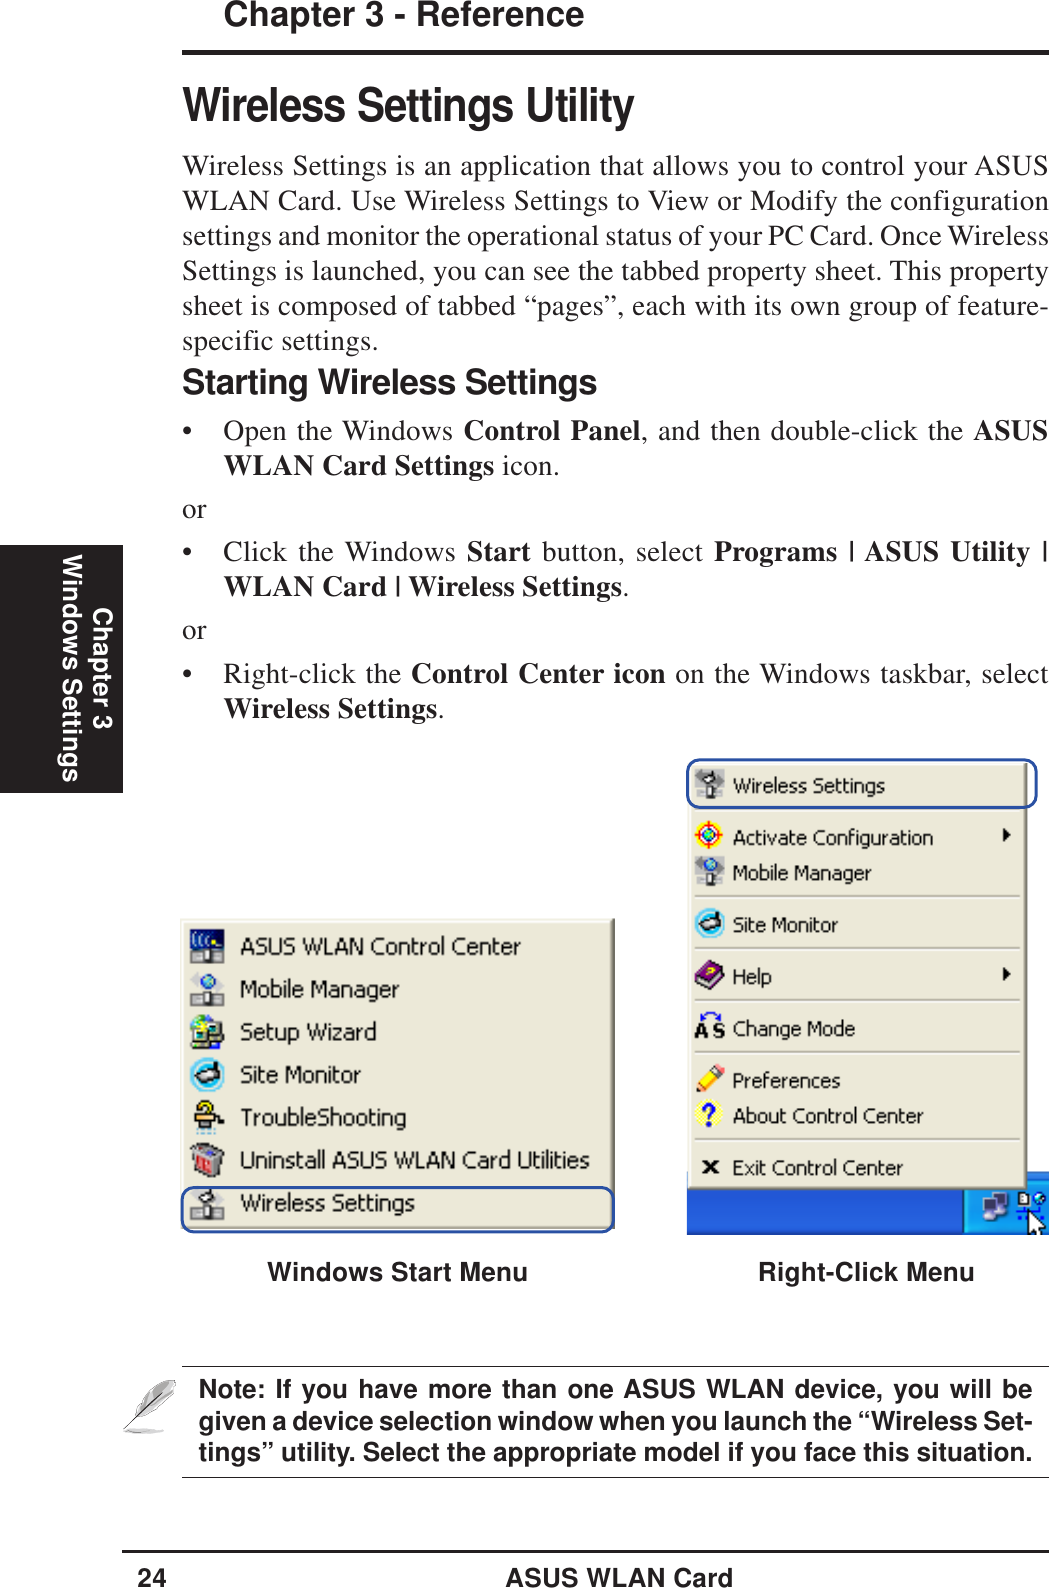 24 ASUS WLAN CardChapter 3 - ReferenceChapter 3Windows SettingsWireless Settings UtilityWireless Settings is an application that allows you to control your ASUSWLAN Card. Use Wireless Settings to View or Modify the configurationsettings and monitor the operational status of your PC Card. Once WirelessSettings is launched, you can see the tabbed property sheet. This propertysheet is composed of tabbed “pages”, each with its own group of feature-specific settings.Starting Wireless Settings• Open the Windows Control Panel, and then double-click the ASUSWLAN Card Settings icon.or• Click the Windows Start button, select Programs | ASUS Utility |WLAN Card | Wireless Settings.or• Right-click the Control Center icon on the Windows taskbar, selectWireless Settings.Note: If you have more than one ASUS WLAN device, you will begiven a device selection window when you launch the “Wireless Set-tings” utility. Select the appropriate model if you face this situation.Windows Start Menu Right-Click Menu